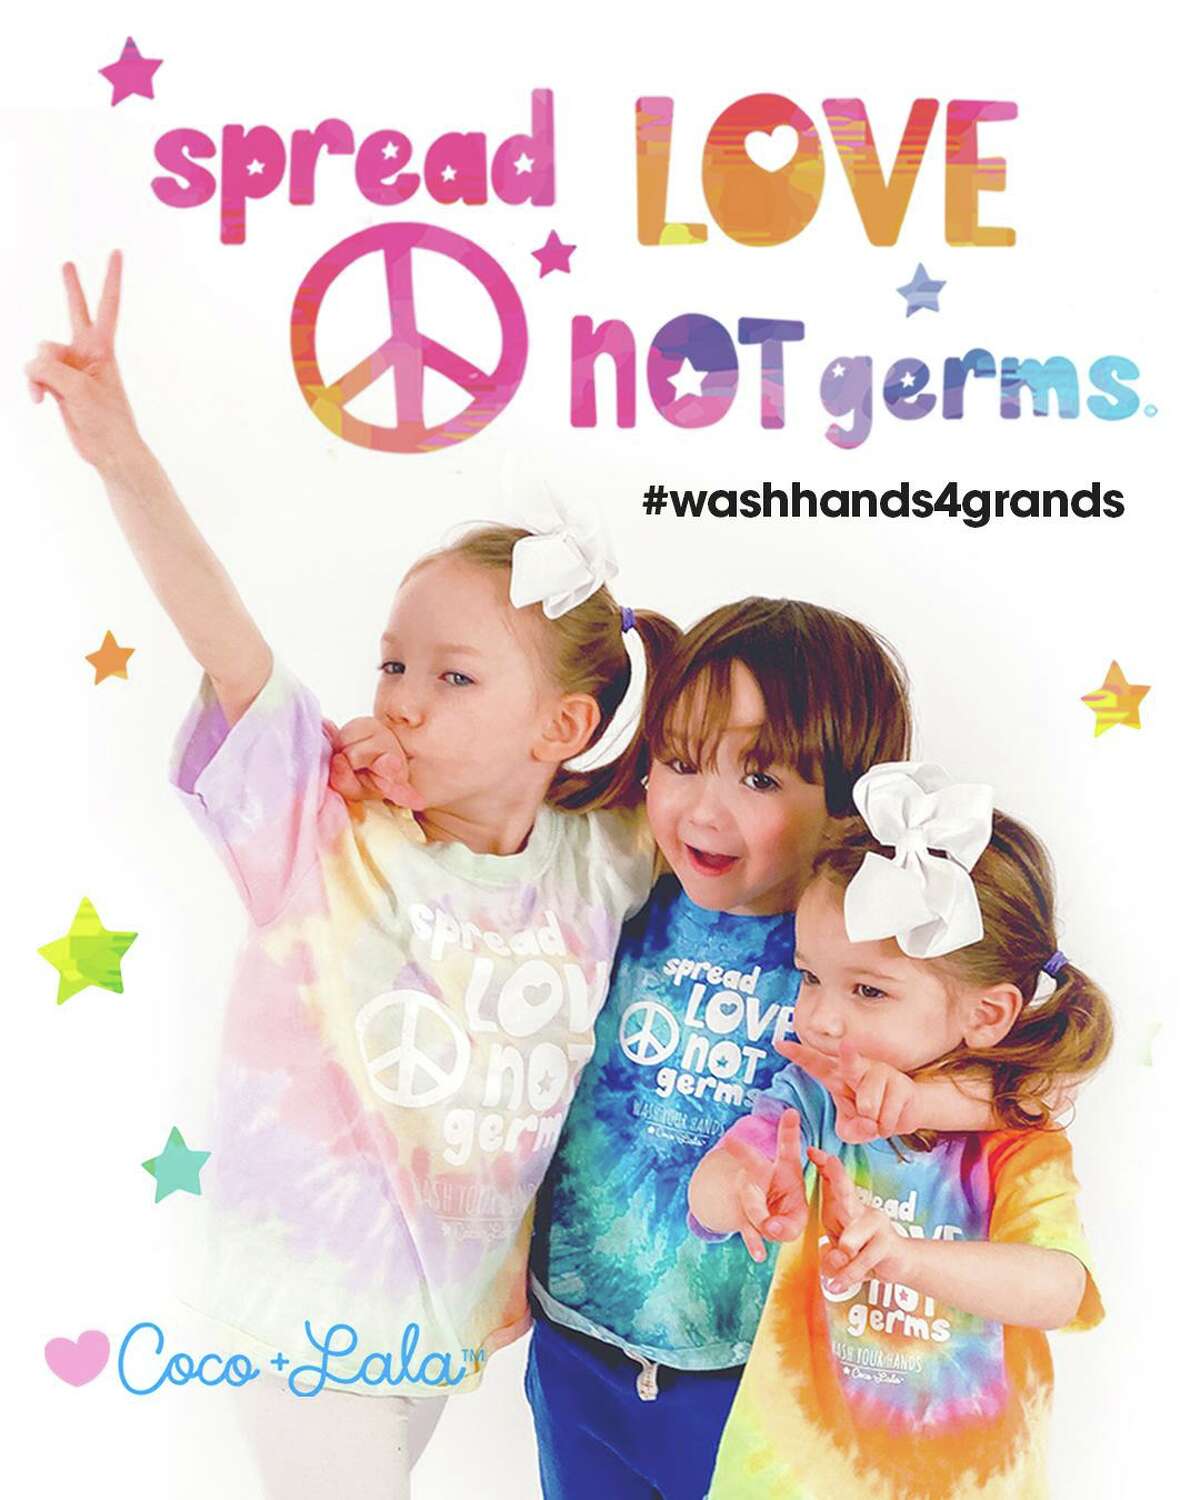 Six-year-old Leontine Doherty and her brother 4-year old Colton Doherty (with little sister Peachie) have created tie dye t-shirts to inspire us to: Spread Love Not Germs —wash your hands to help grandparents and loved ones stay safe.